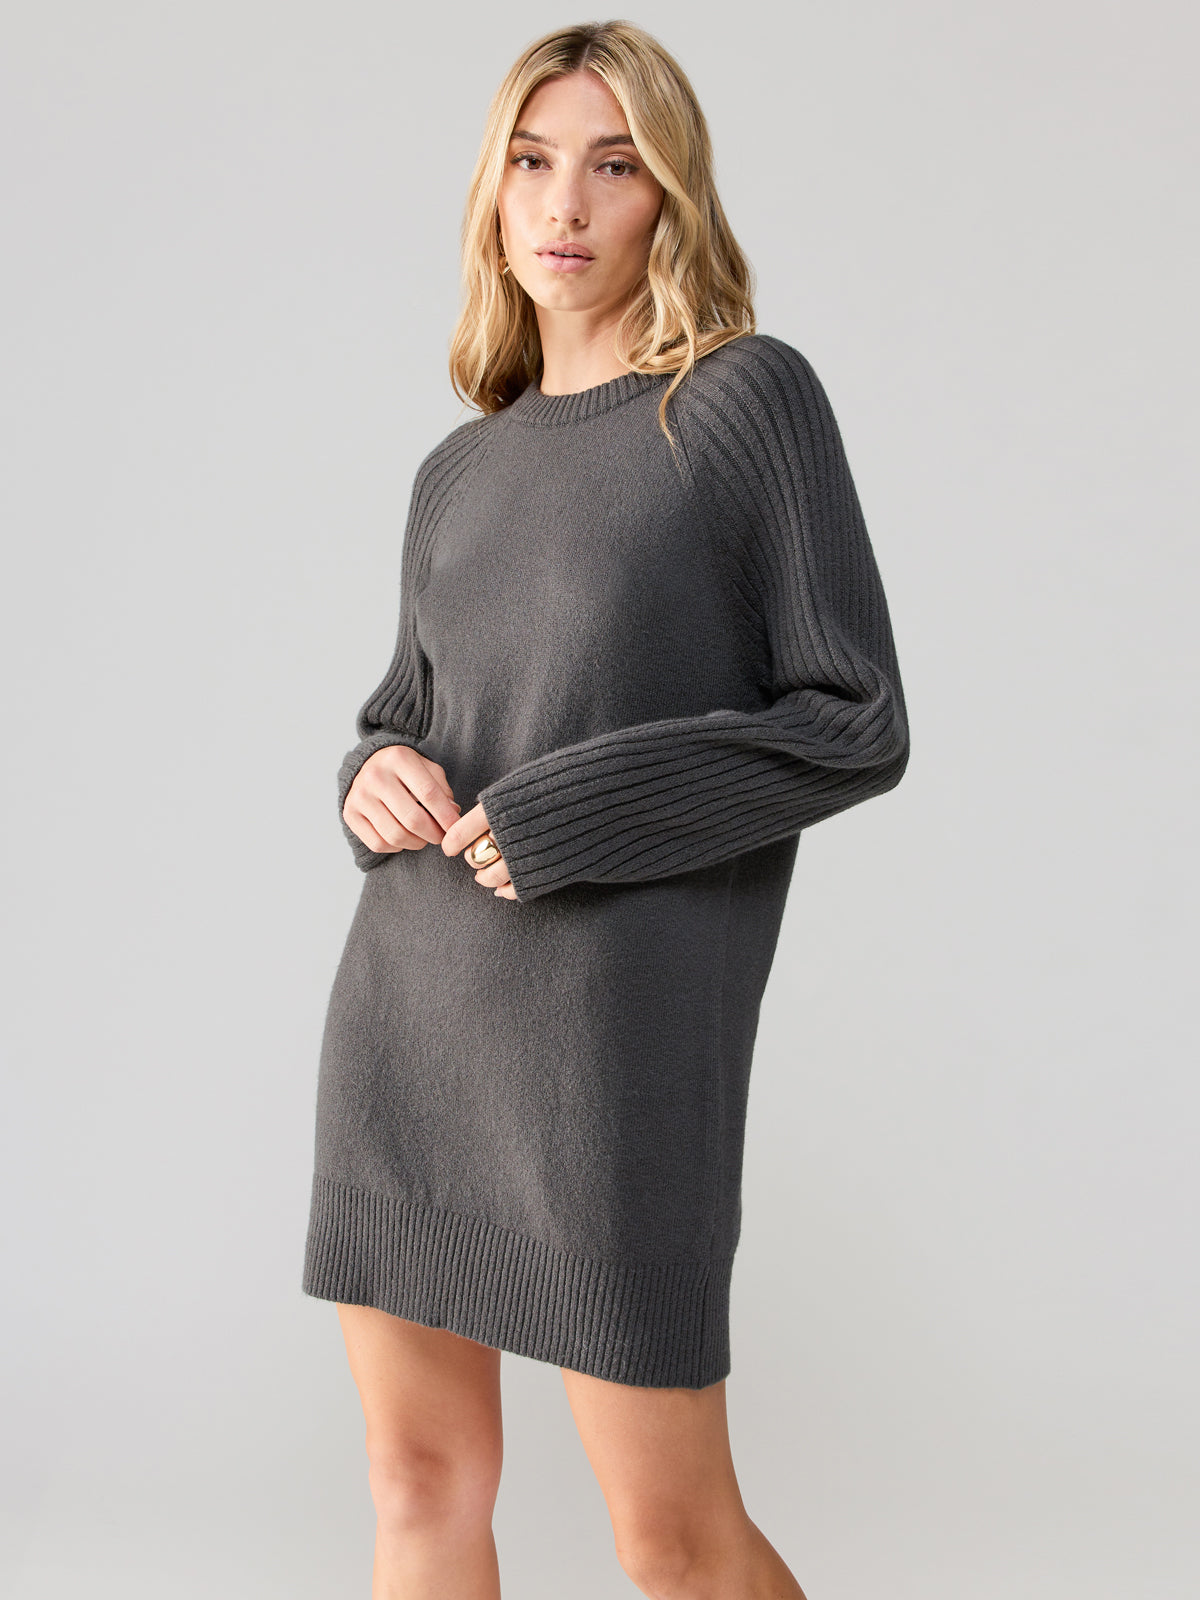 City Girl Sweater Dress Mineral